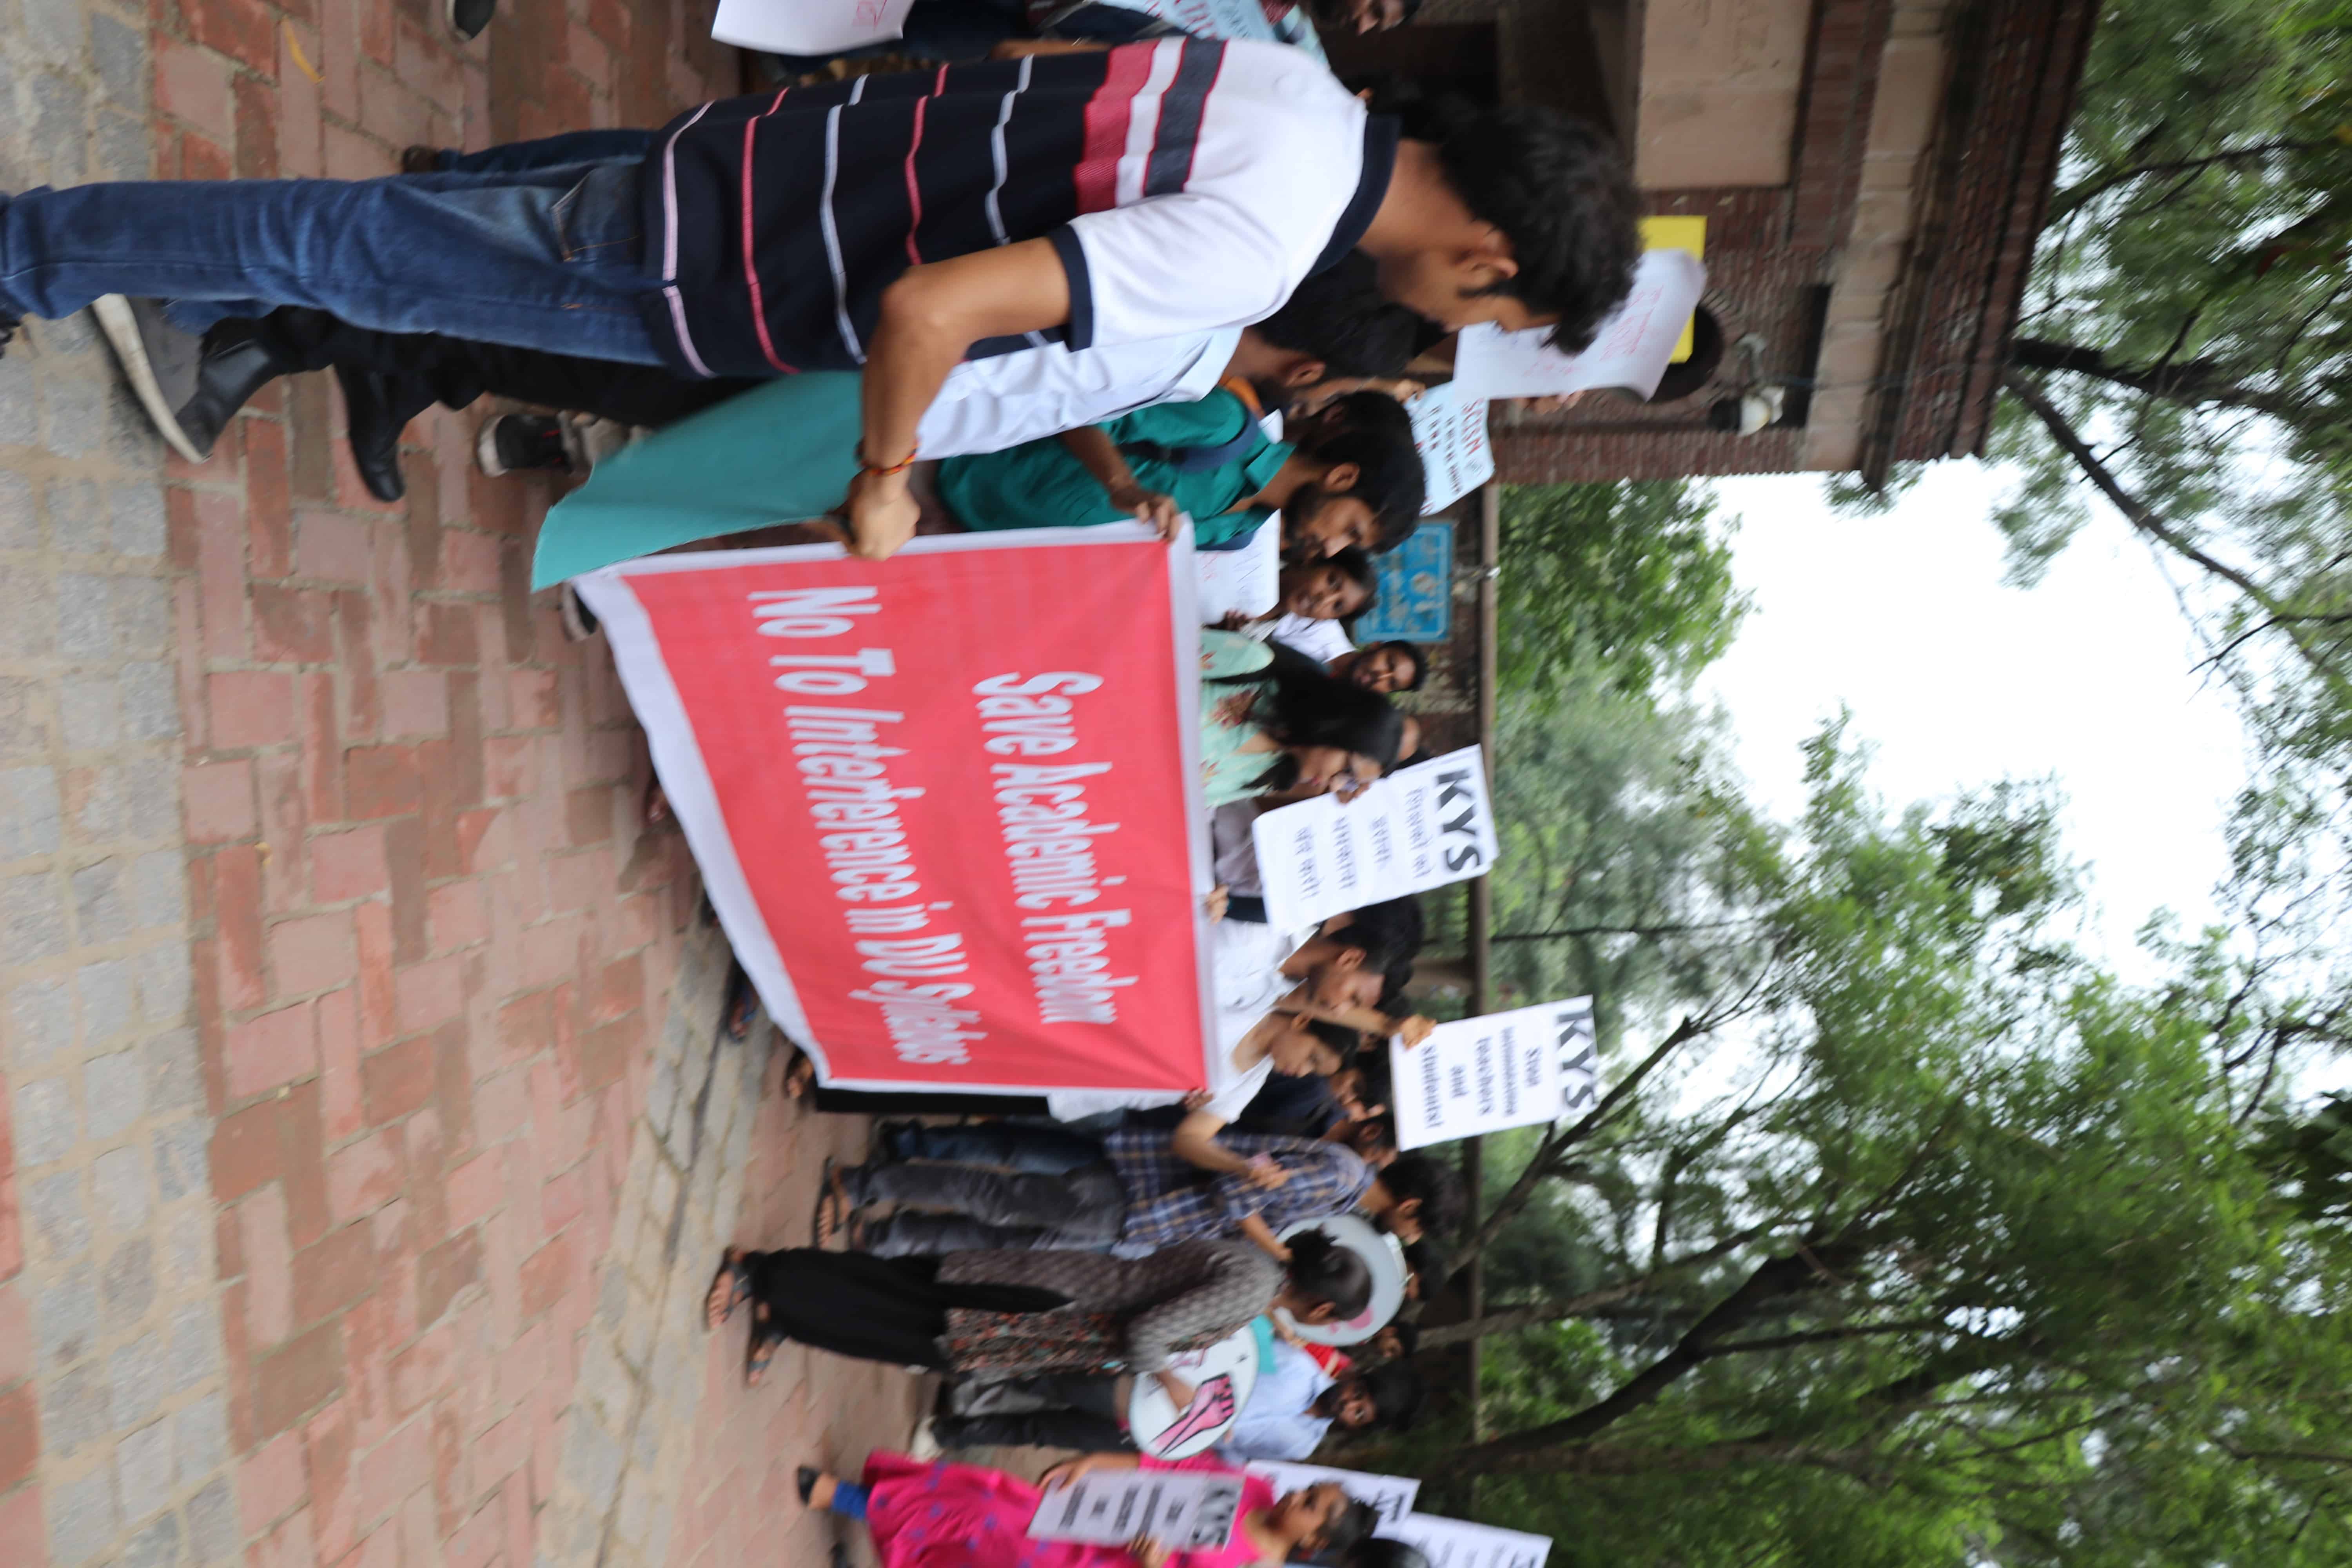 Protesters at the Faculty of Arts.